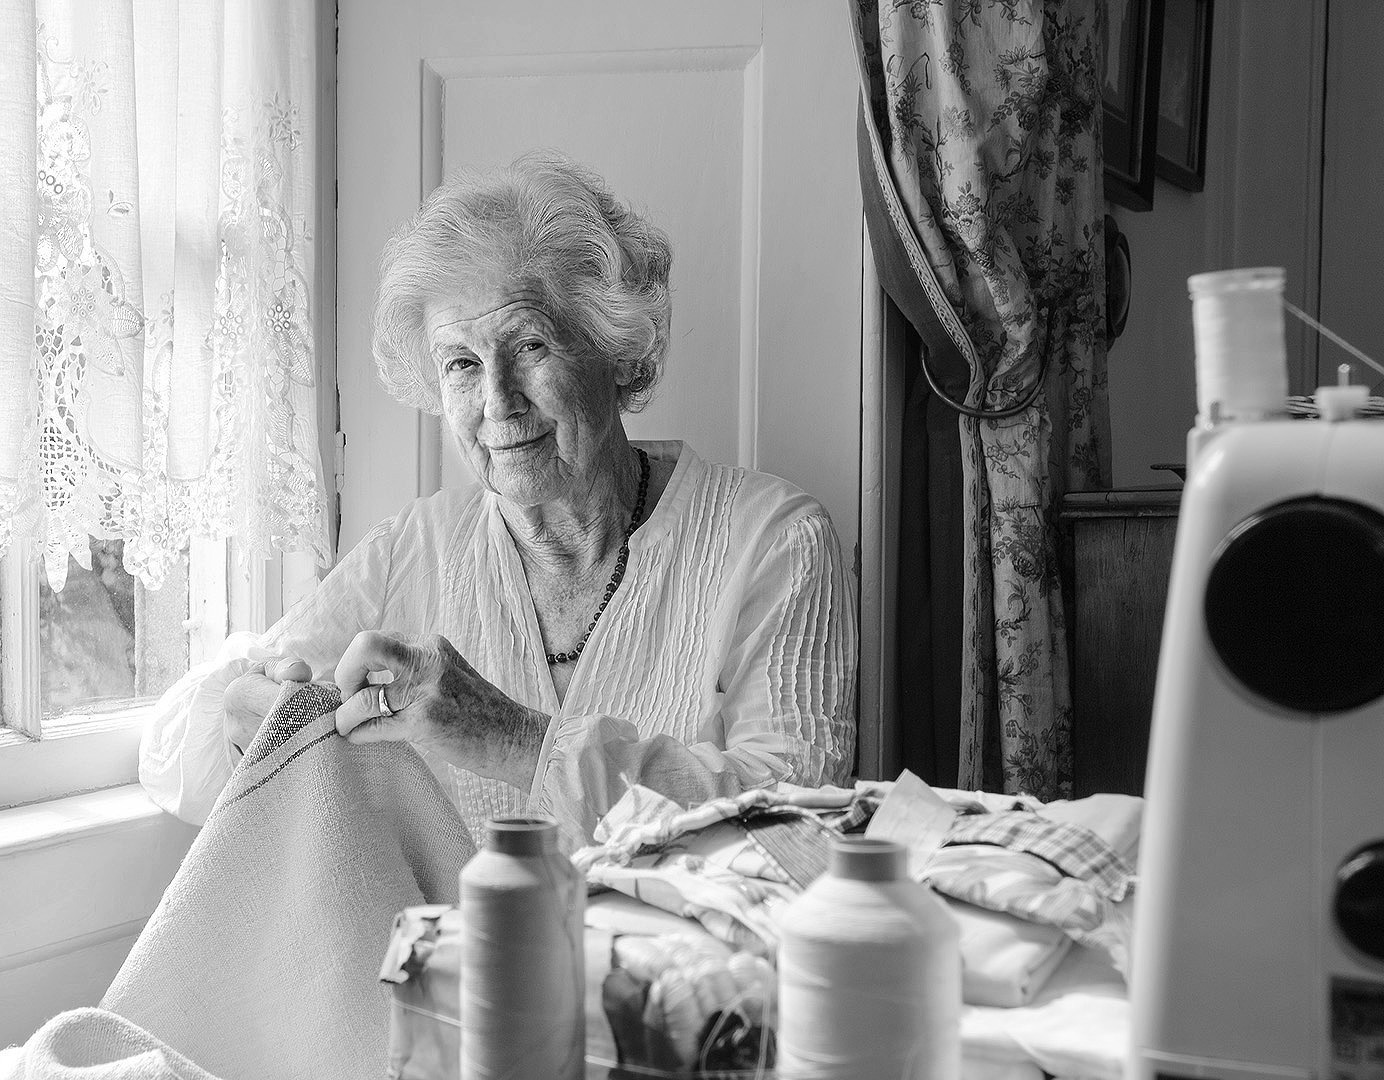 B/W photographic portrait of professional clothes maker older woman at window with sewing